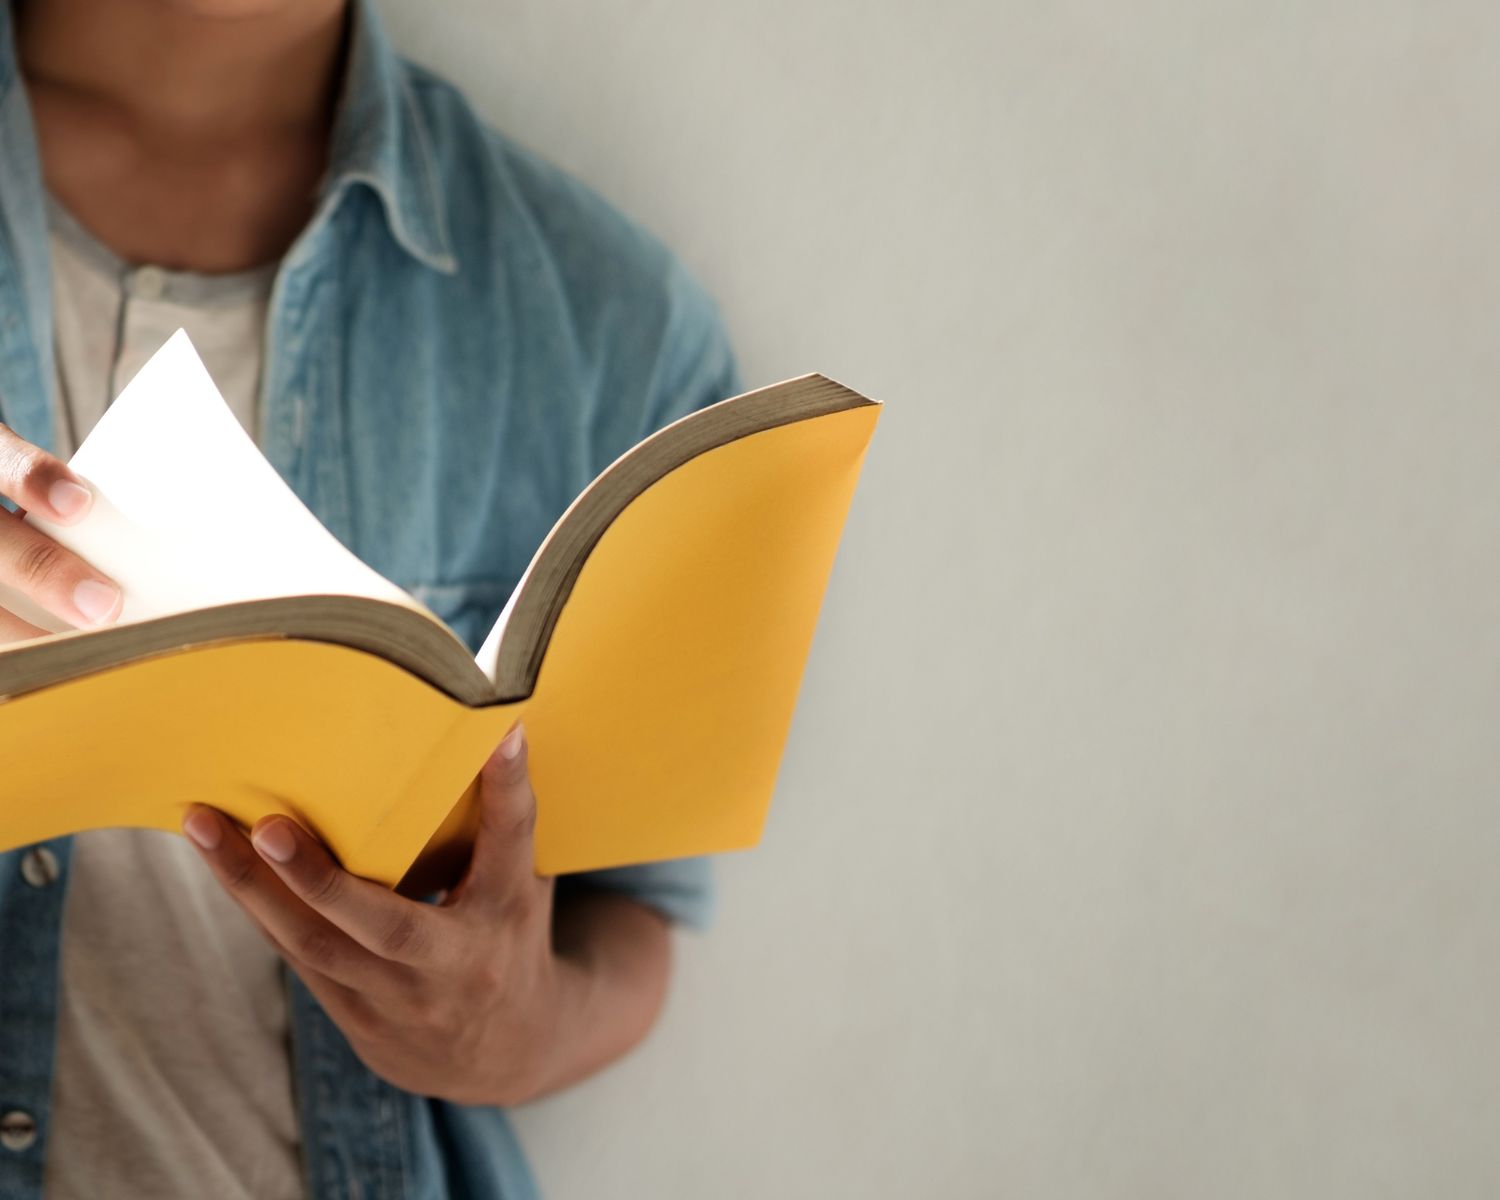 Person holding an open yellow book in front of a plain wall